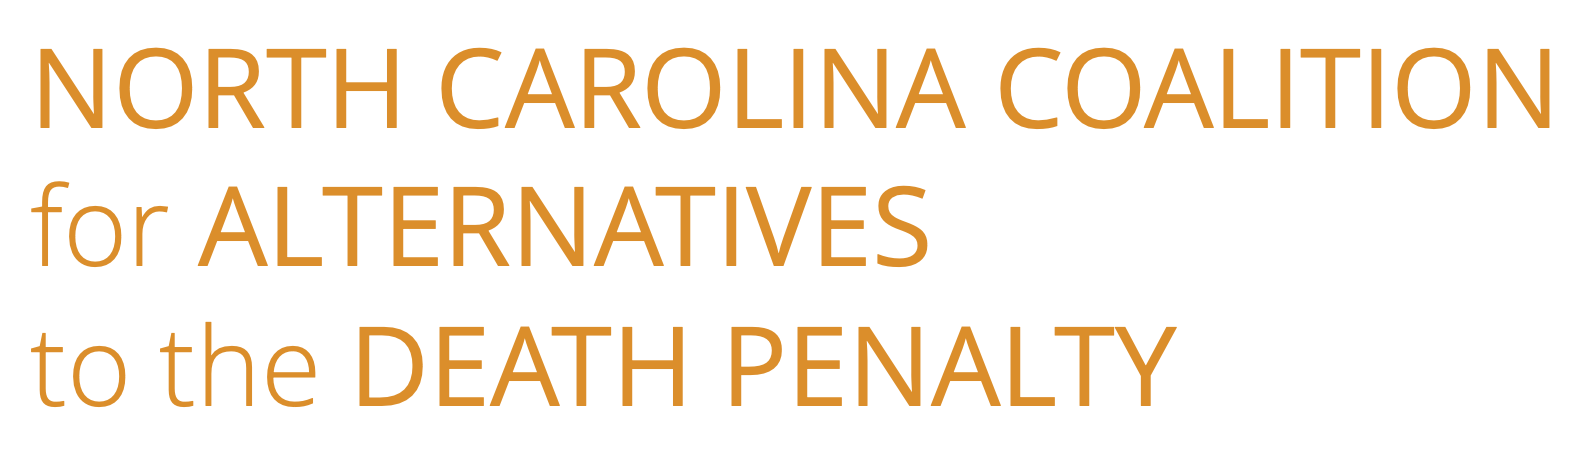 NORTH CAROLINA COALITION for ALTERNATIVES to the DEATH PENALTY